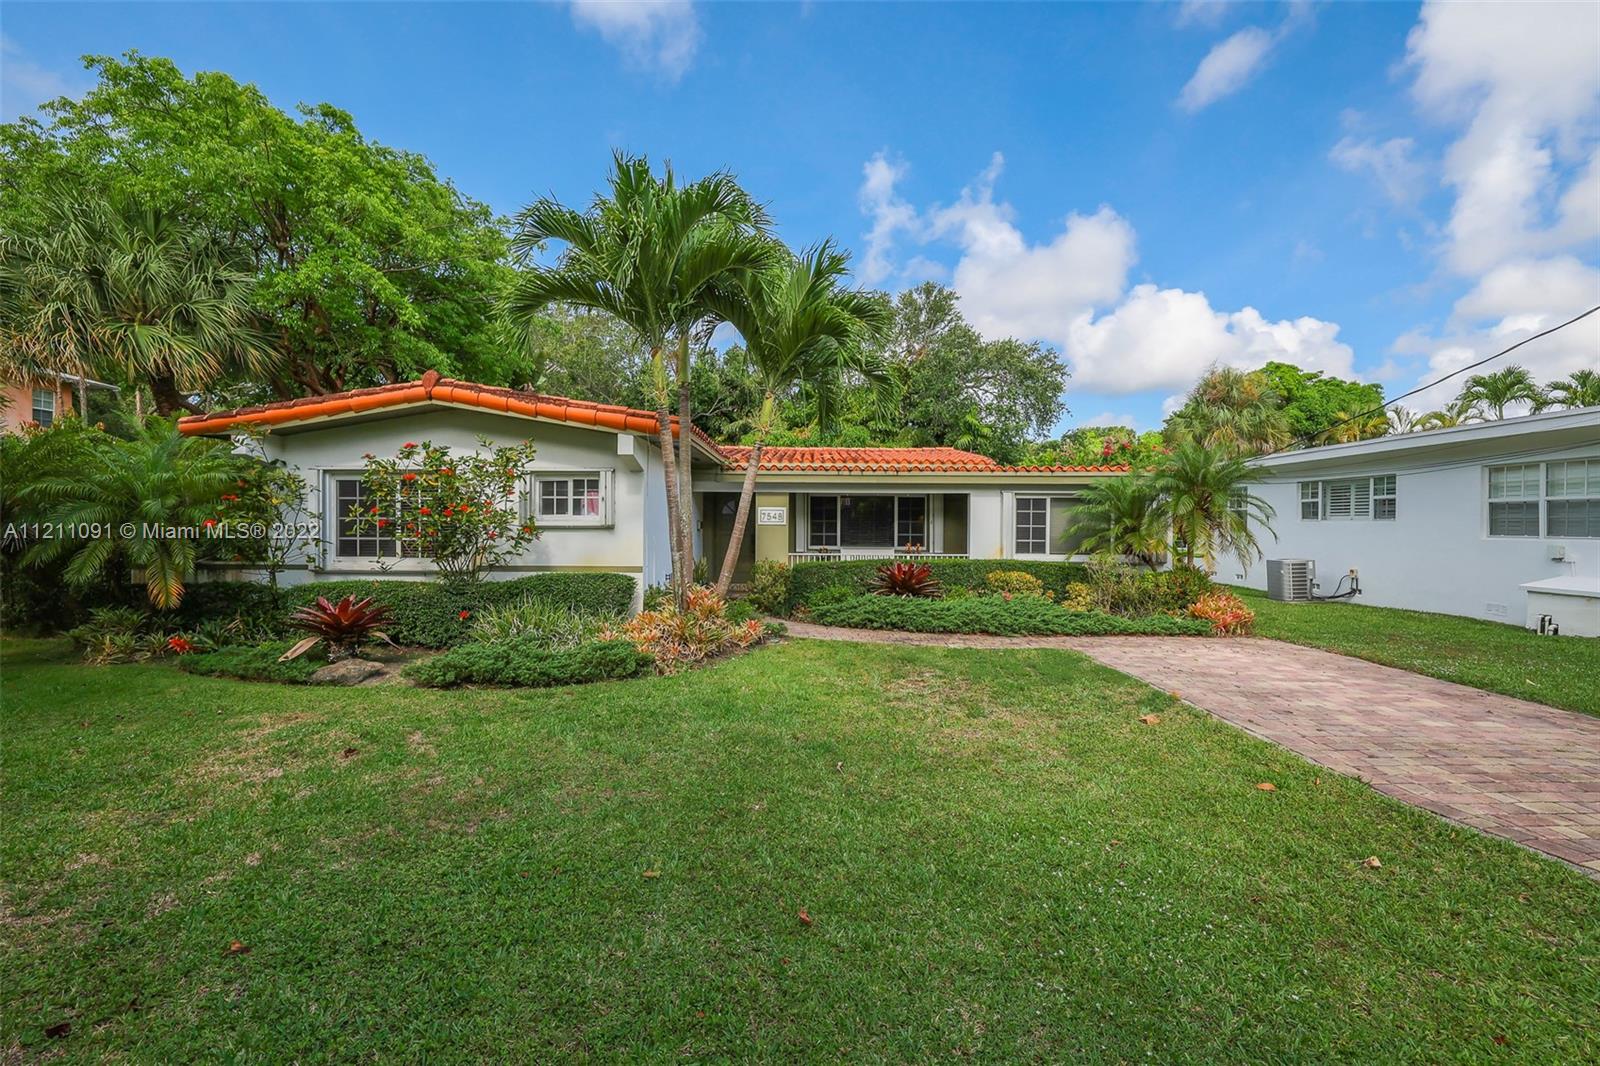 ~ Don't Miss This Fantastic South Miami Home in the Perfect Location ~ 3 Bedrooms / 2 Bathrooms on a 10,931 SF Corner Lot ~ Large Open Living Areas with Tons of Natural Light Throughout ~ Updated Kitchen w/ Silestone Countertops ~ Walk to Restaurants, Shops, Movies and More! ~ Ready to Personalize, Expand or Build New ~ What a Great Opportunity to Live in the City of Pleasant Living! ~